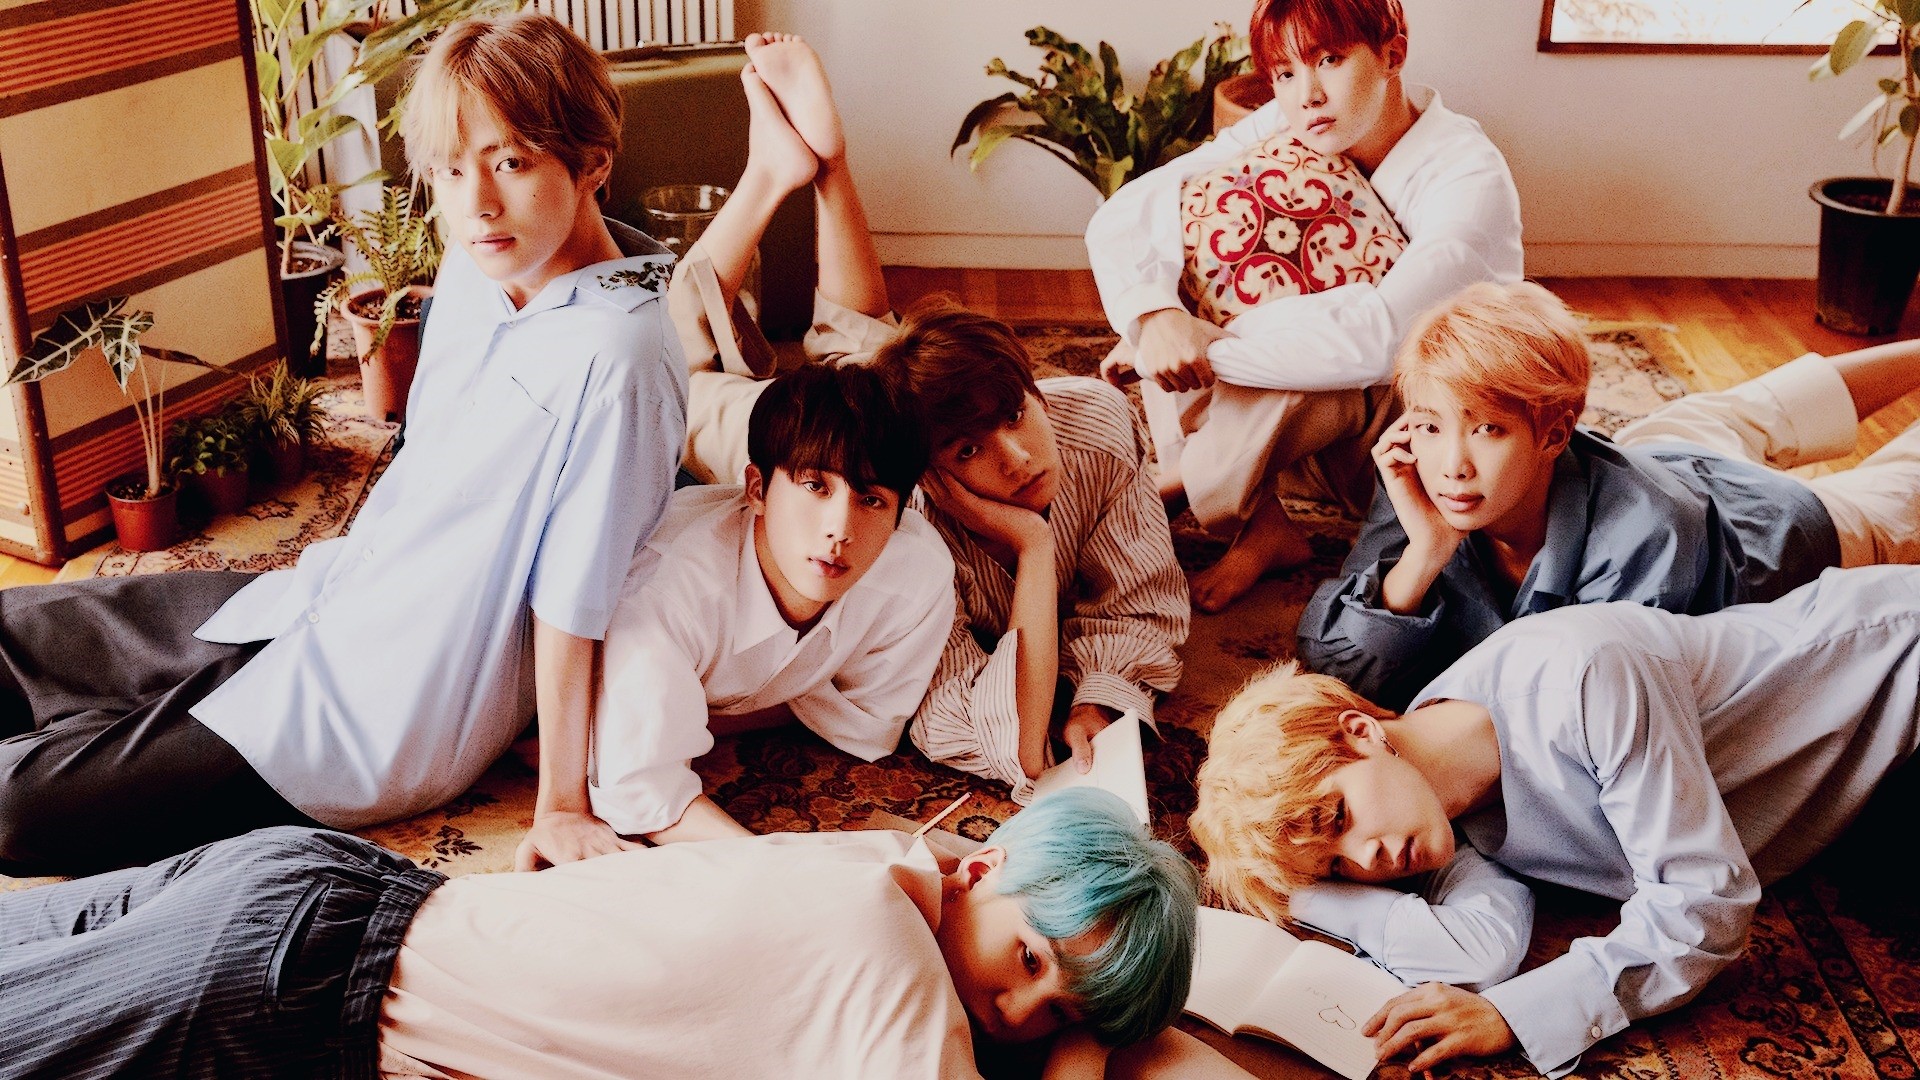 Bts Aesthetic Pc Wallpapers Top Free Bts Aesthetic Pc Backgrounds Sexiezpicz Web Porn